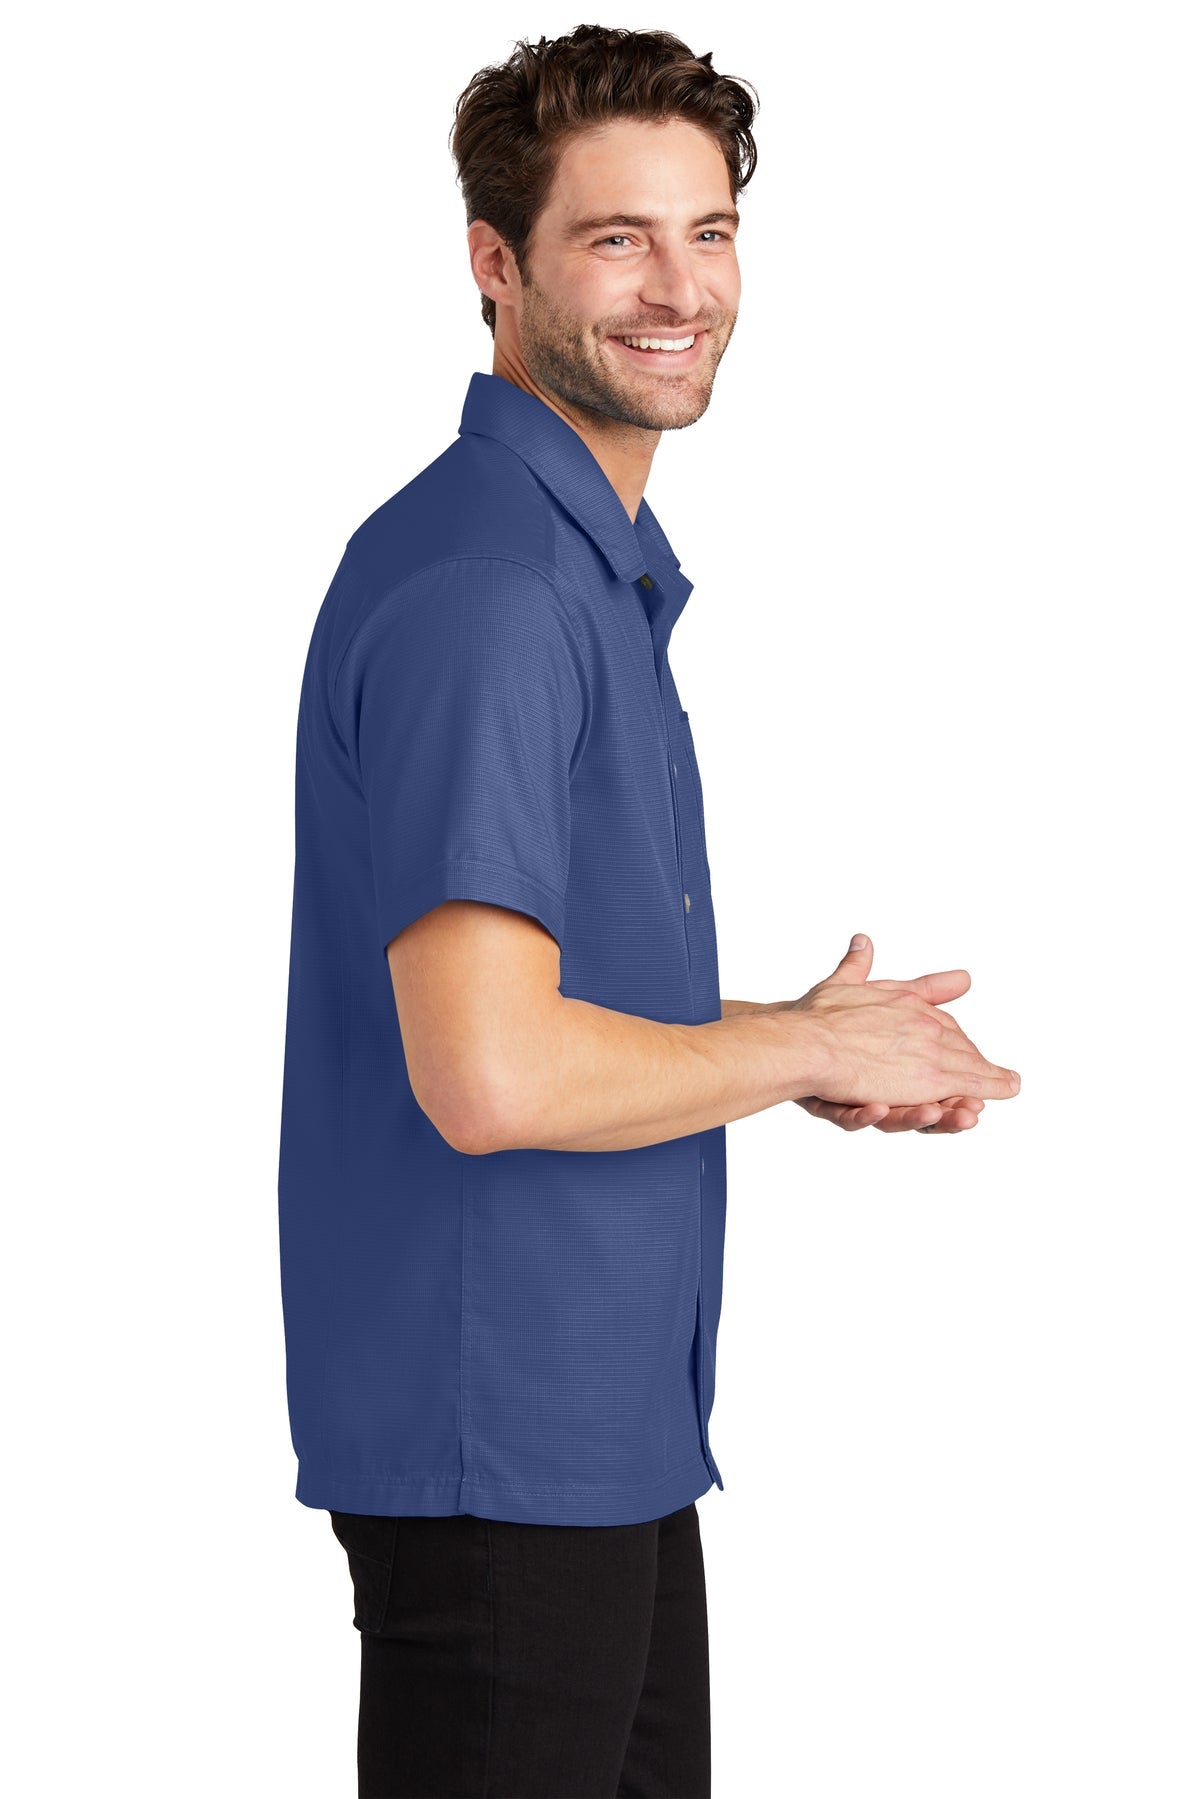 port authority_s662 _royal_company_logo_button downs